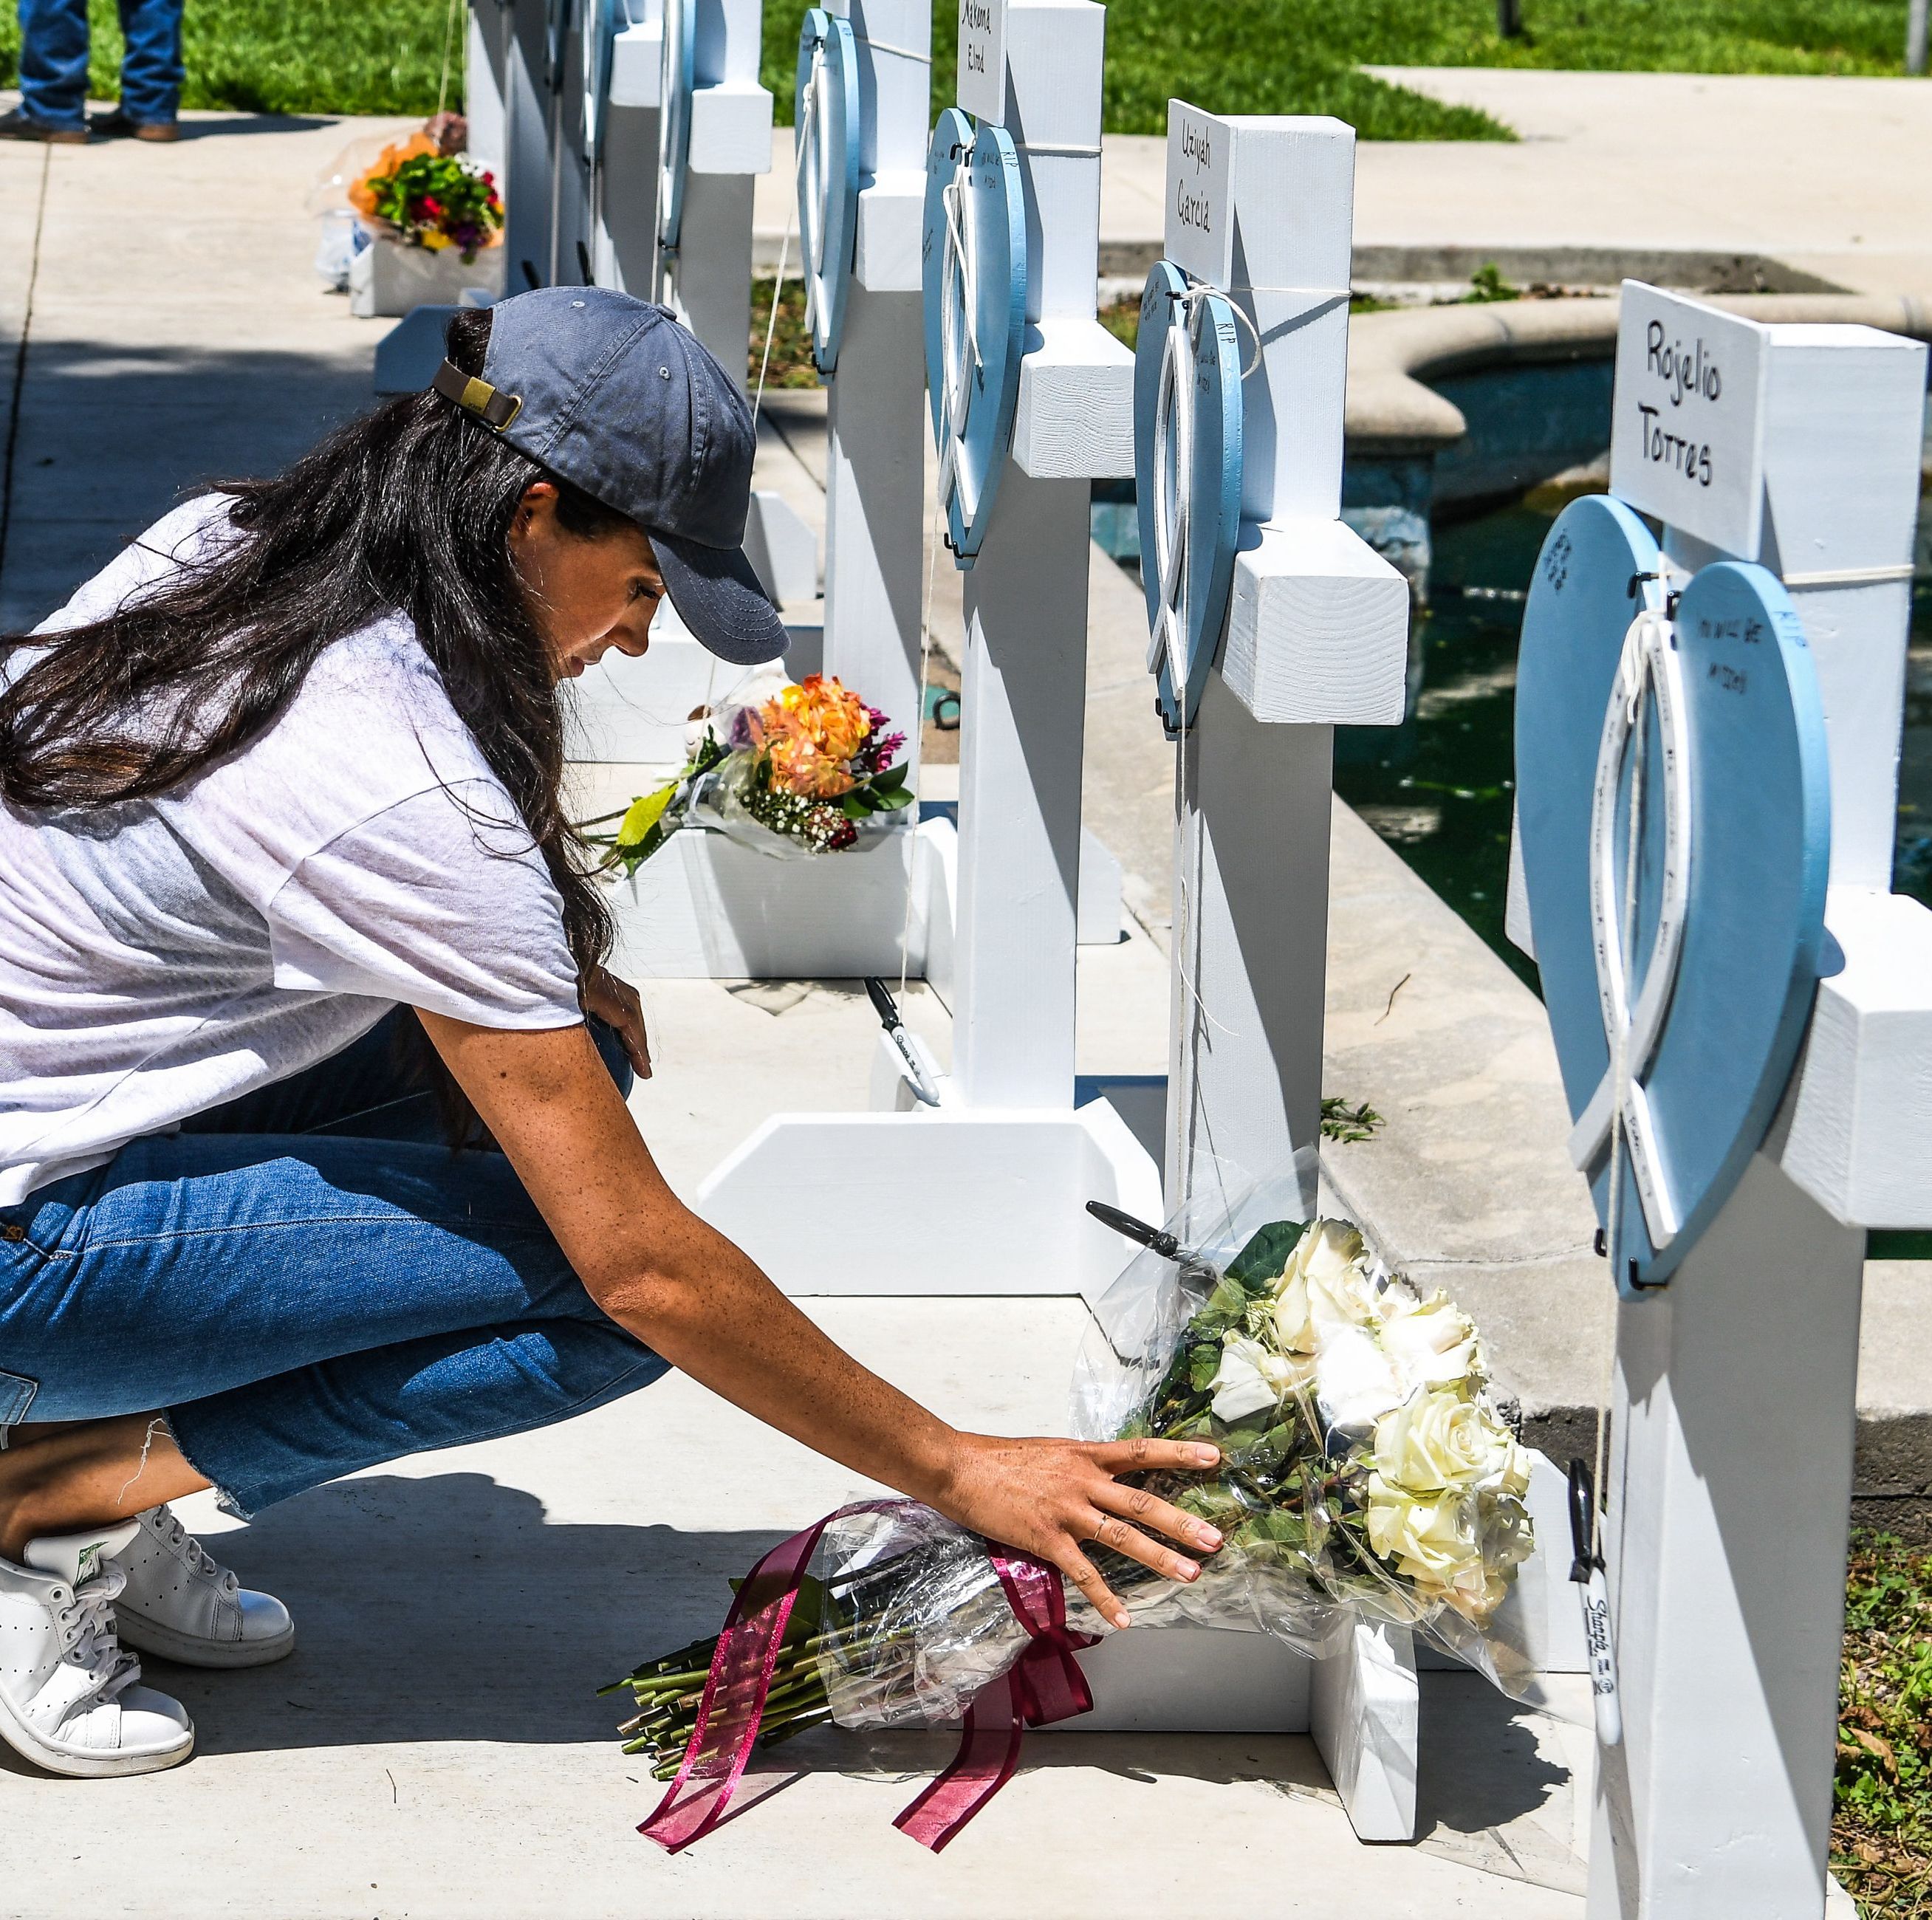 The Duchess of Sussex placed flowers on a memorial outside the Uvalde courthouse.